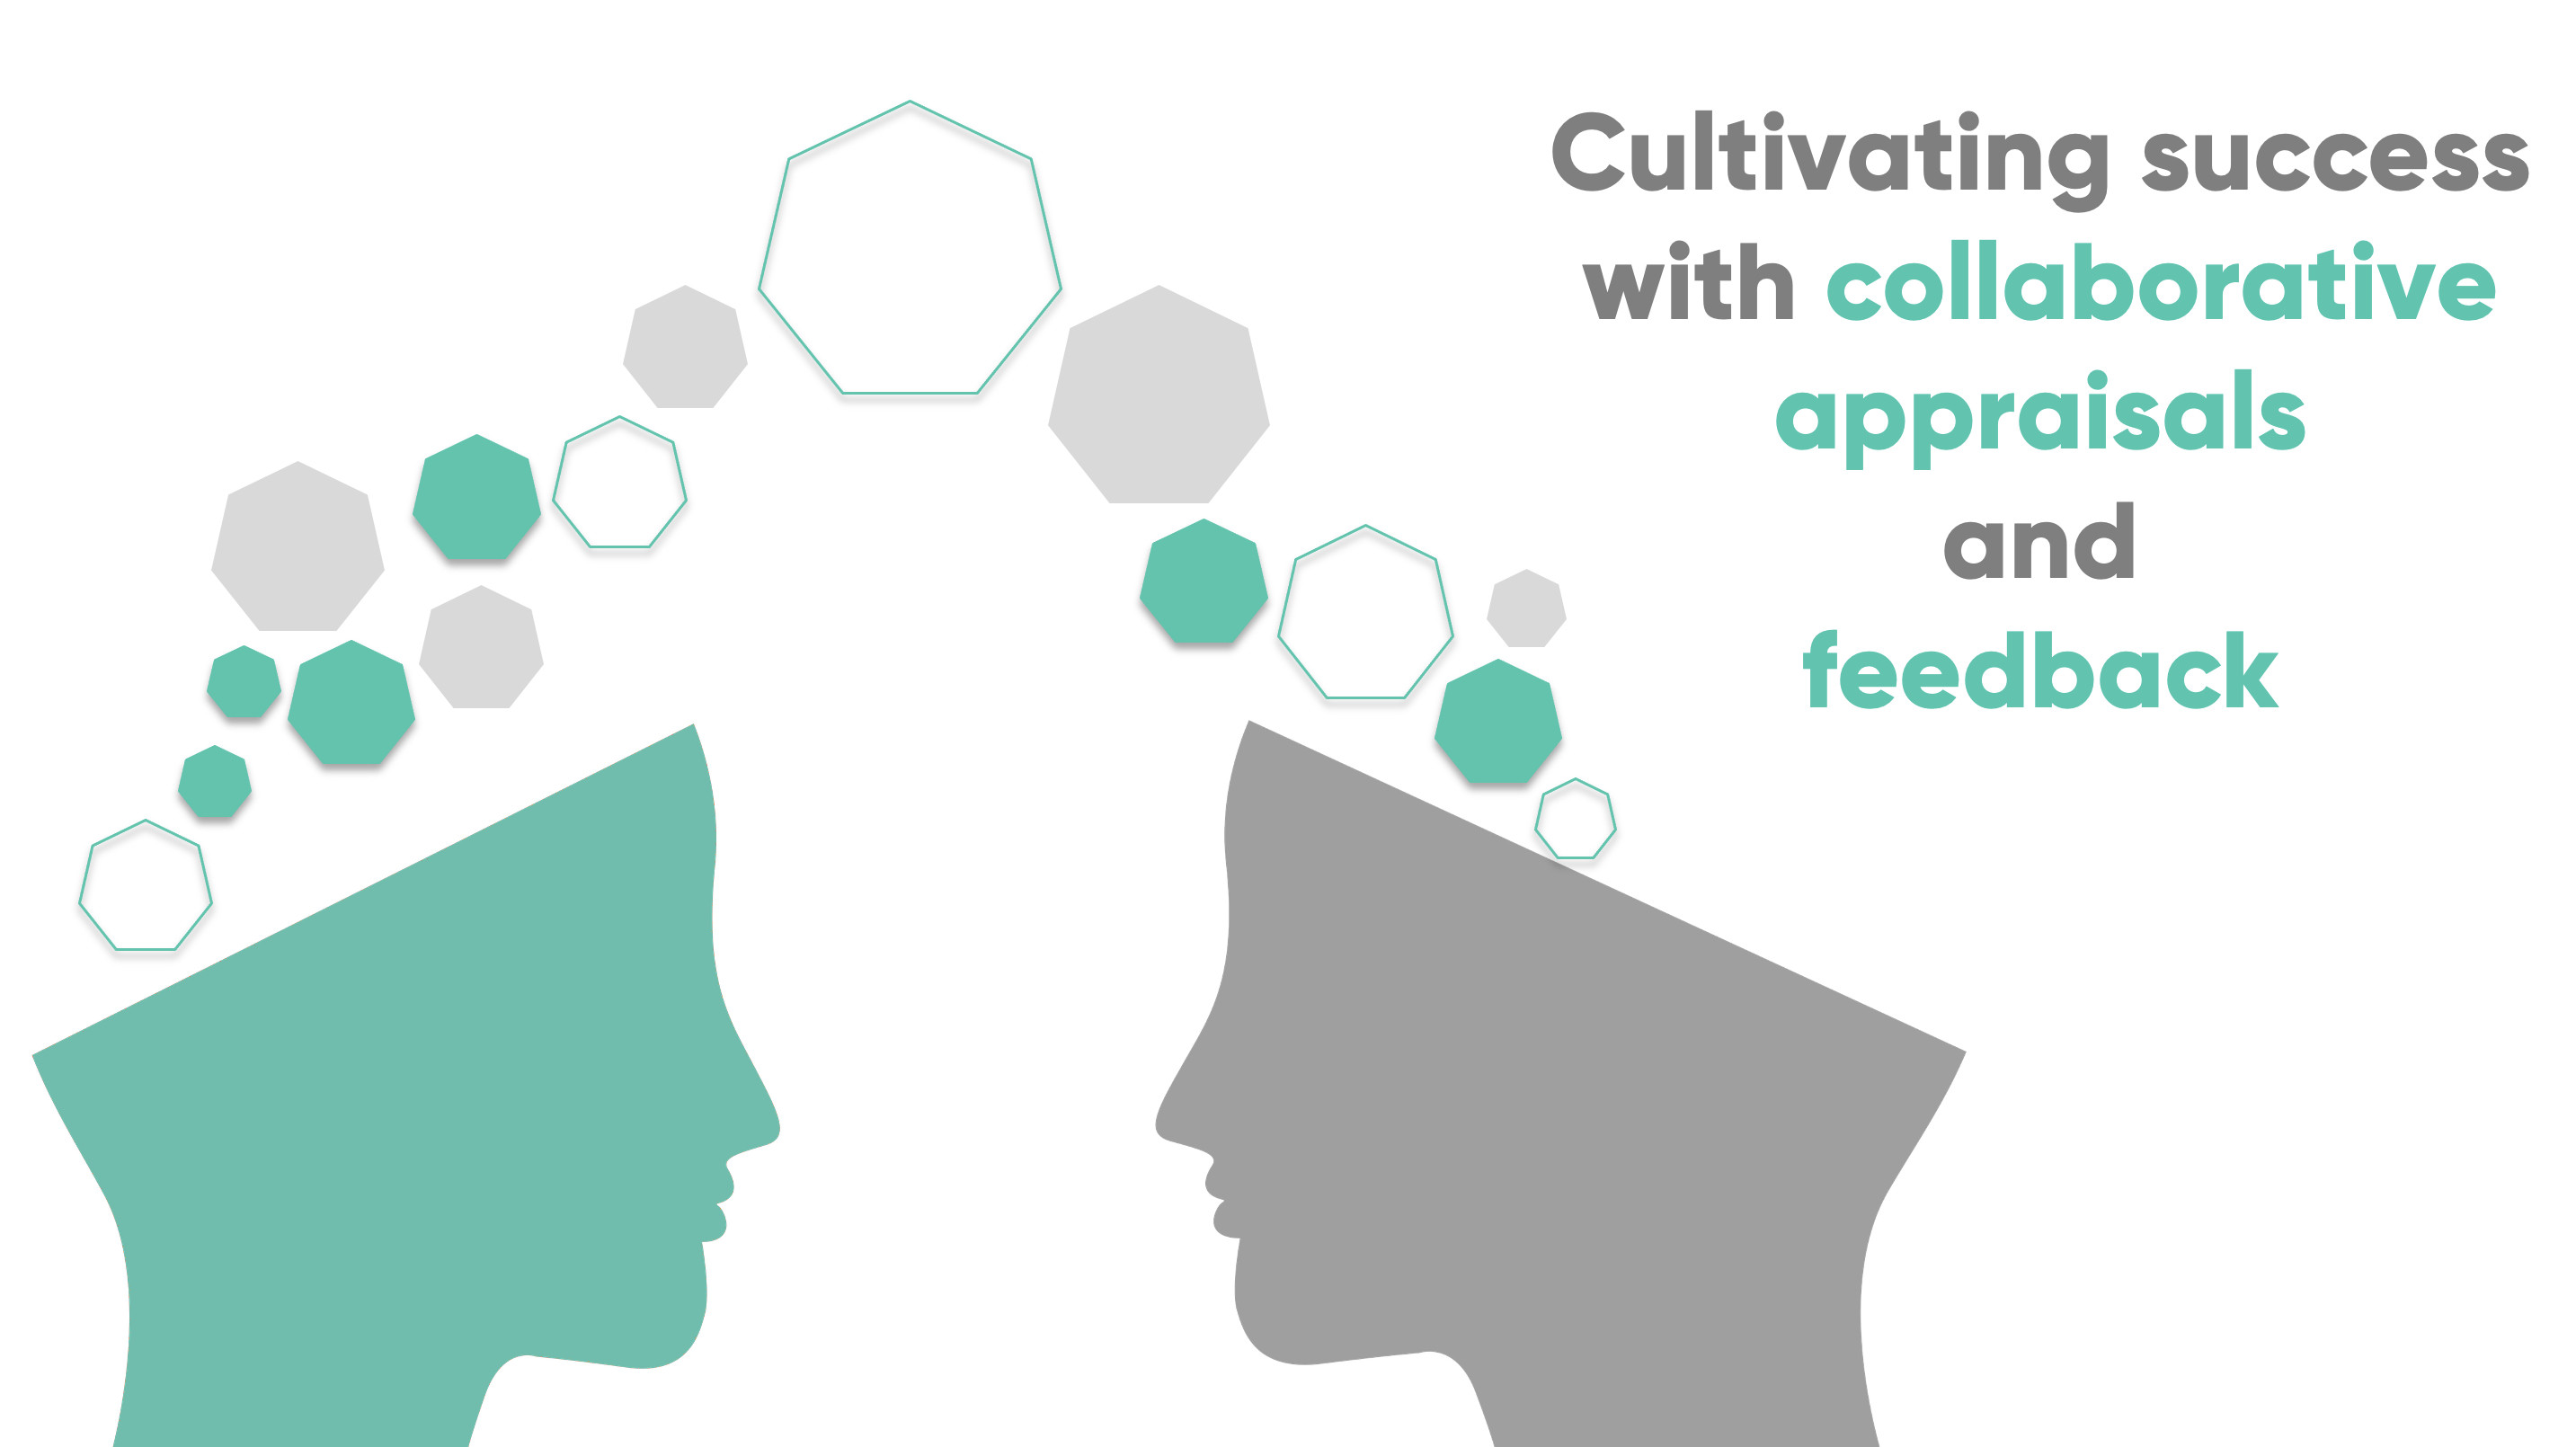 Cultivating success with collaborative appraisals and feedback